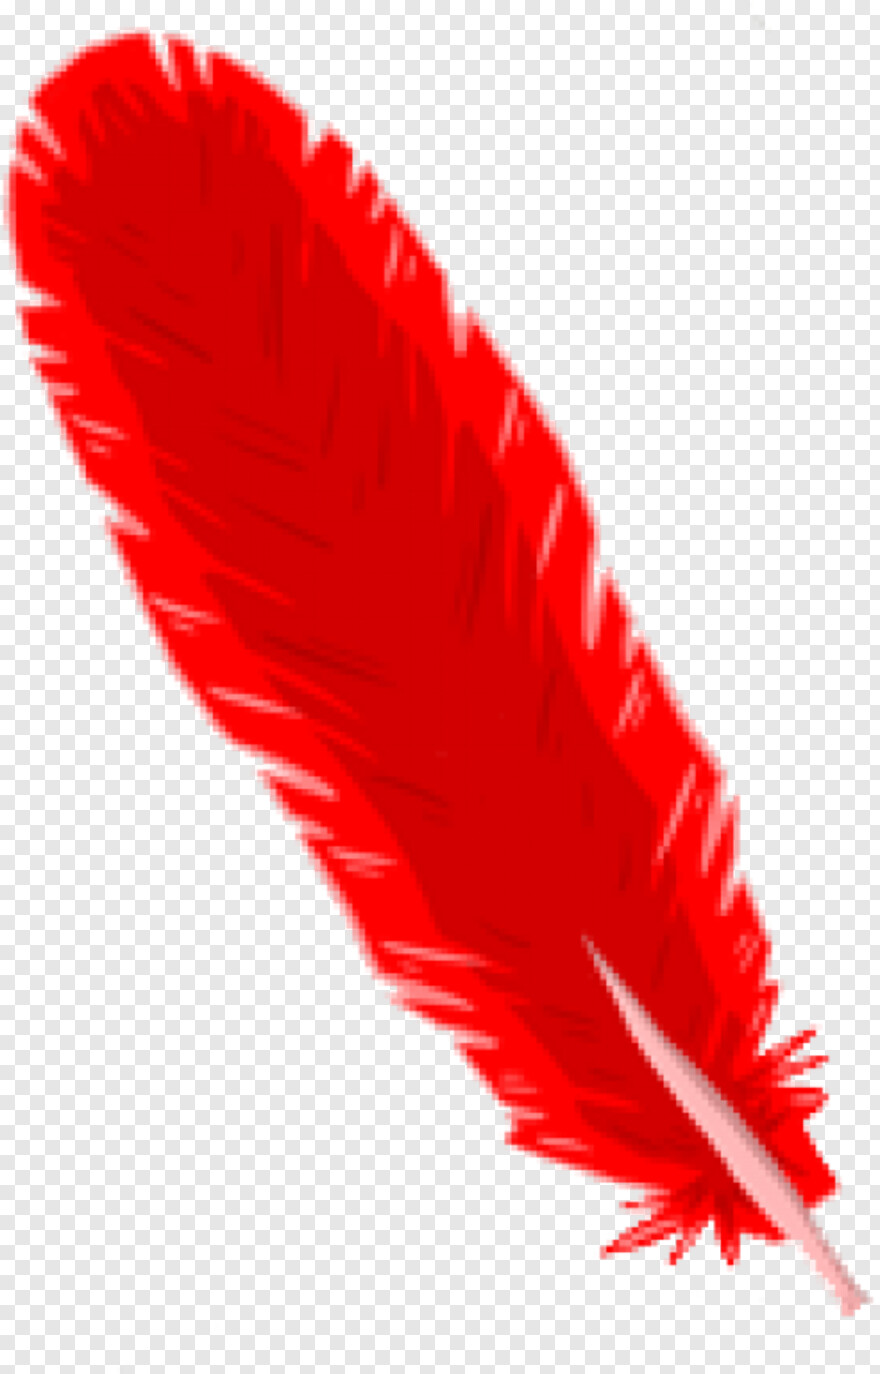 feather-silhouette # 842466